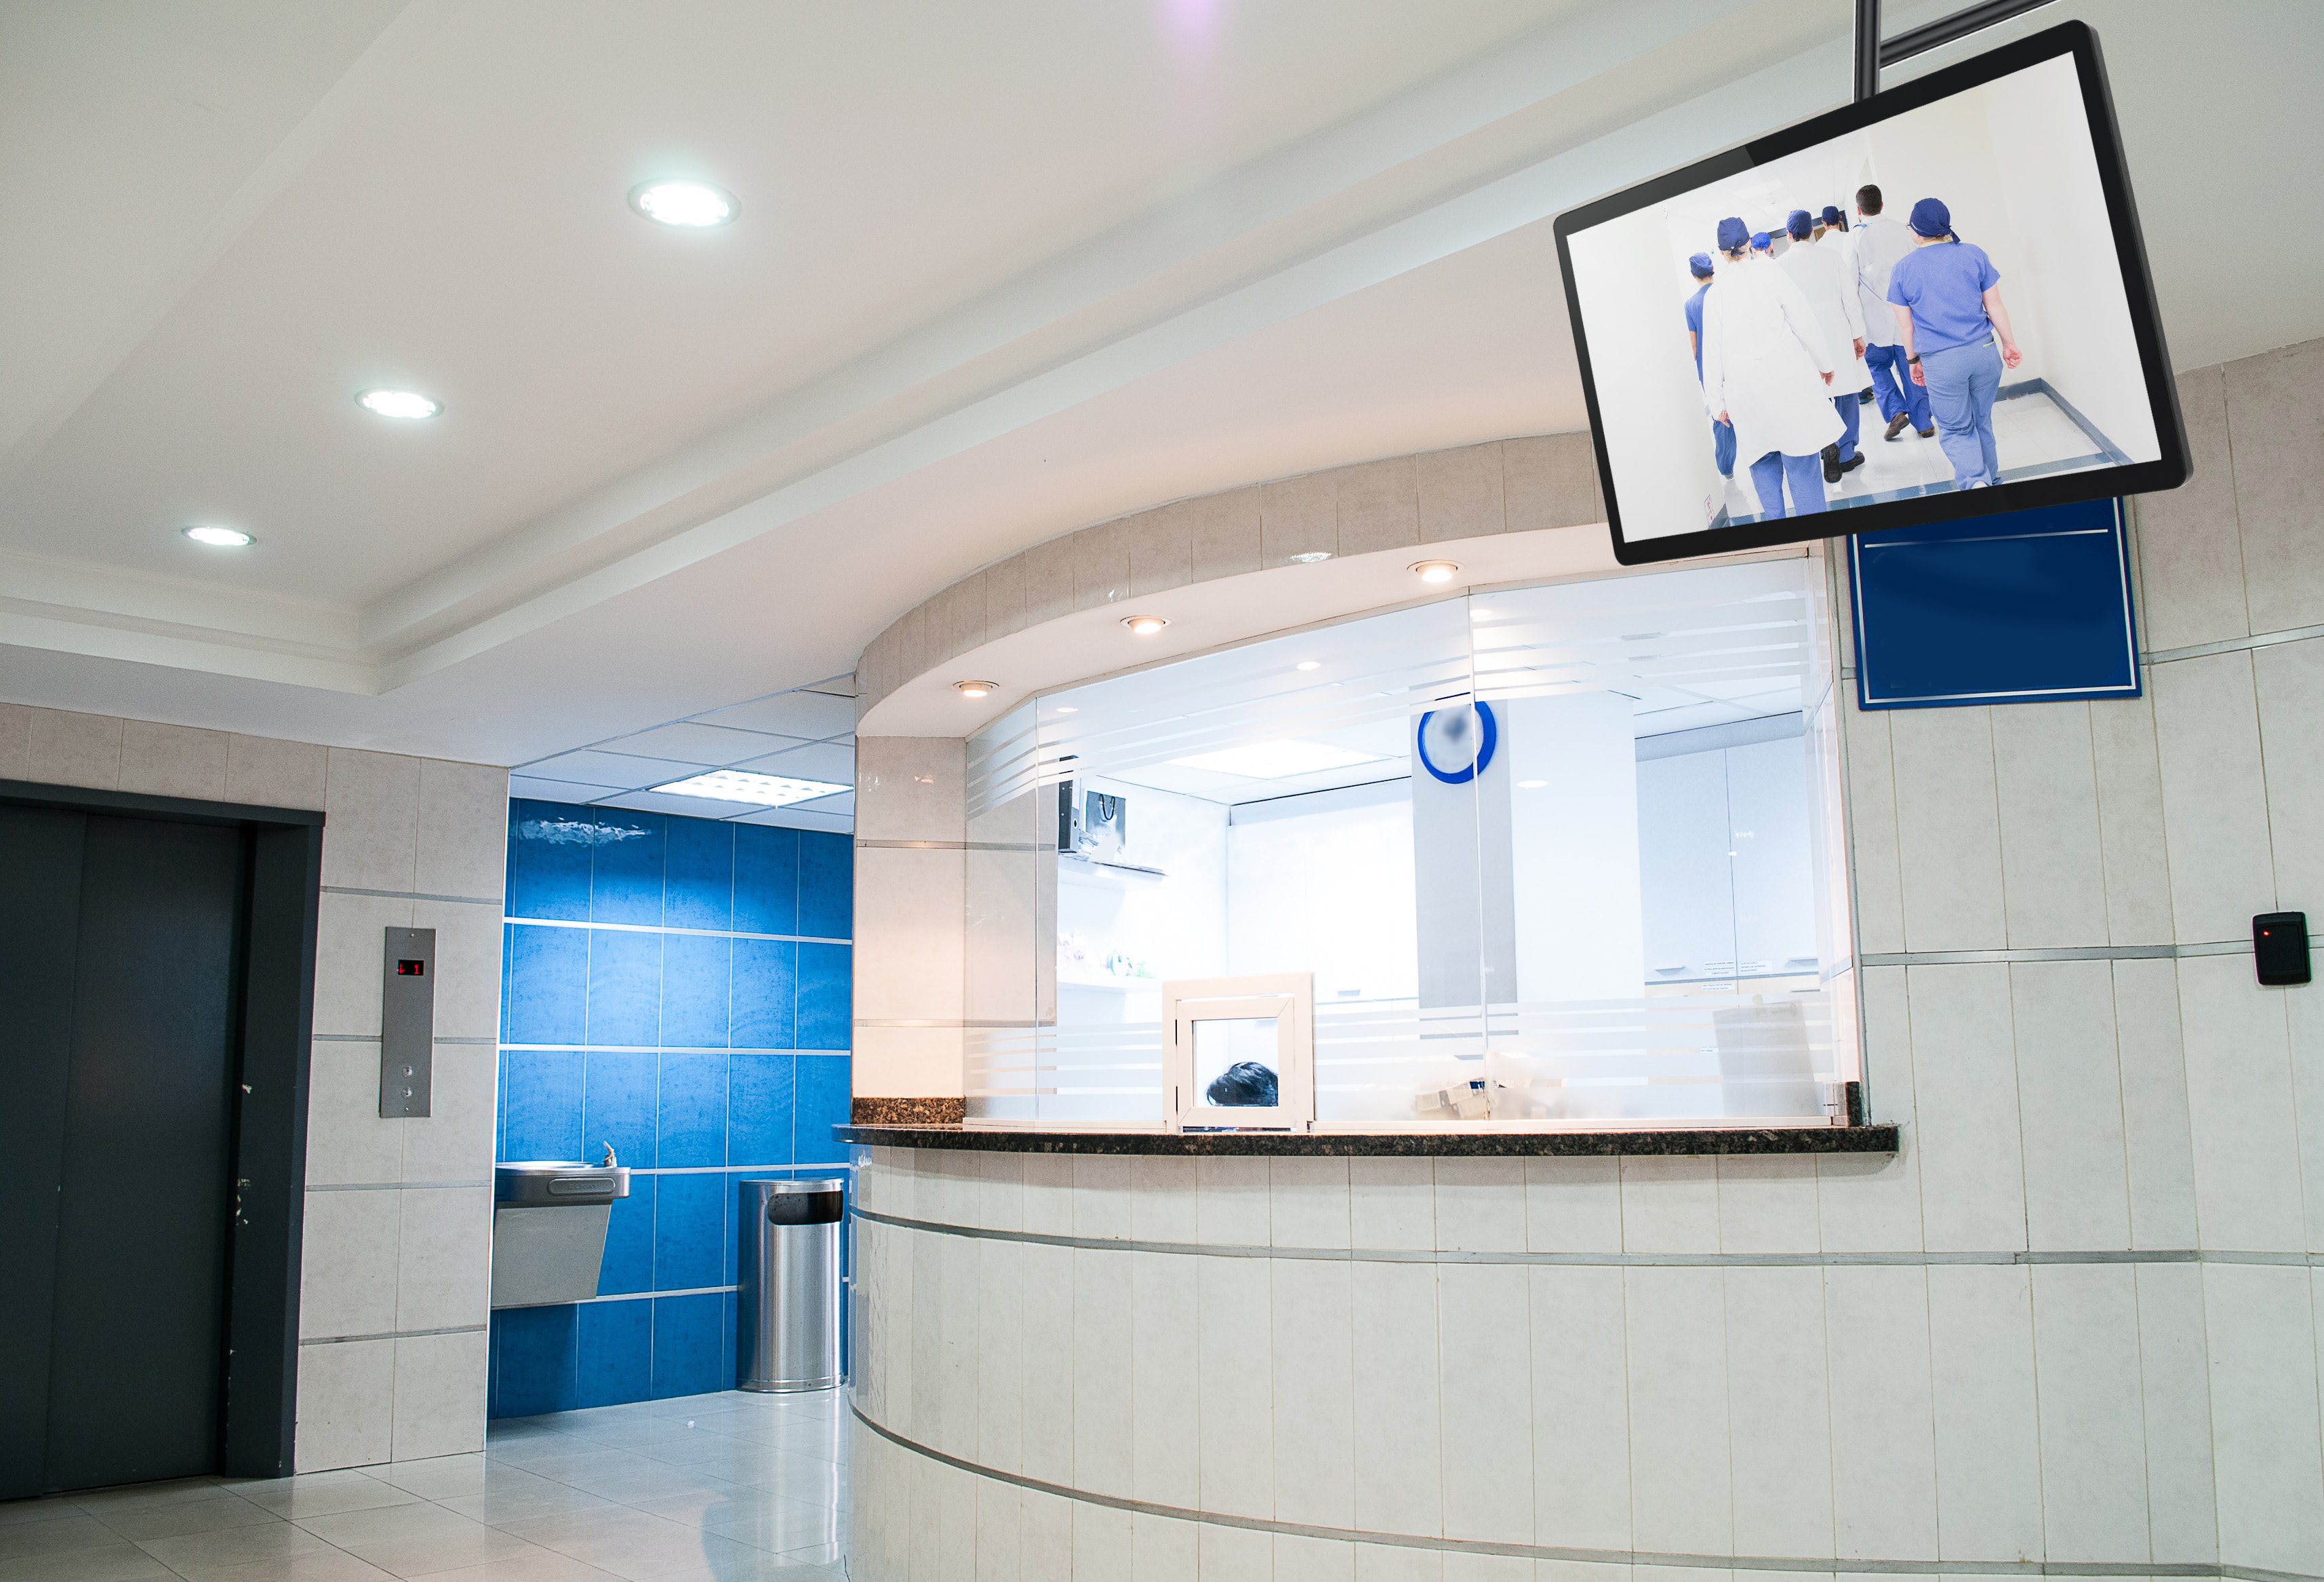 Digital signage in the healthcare industry